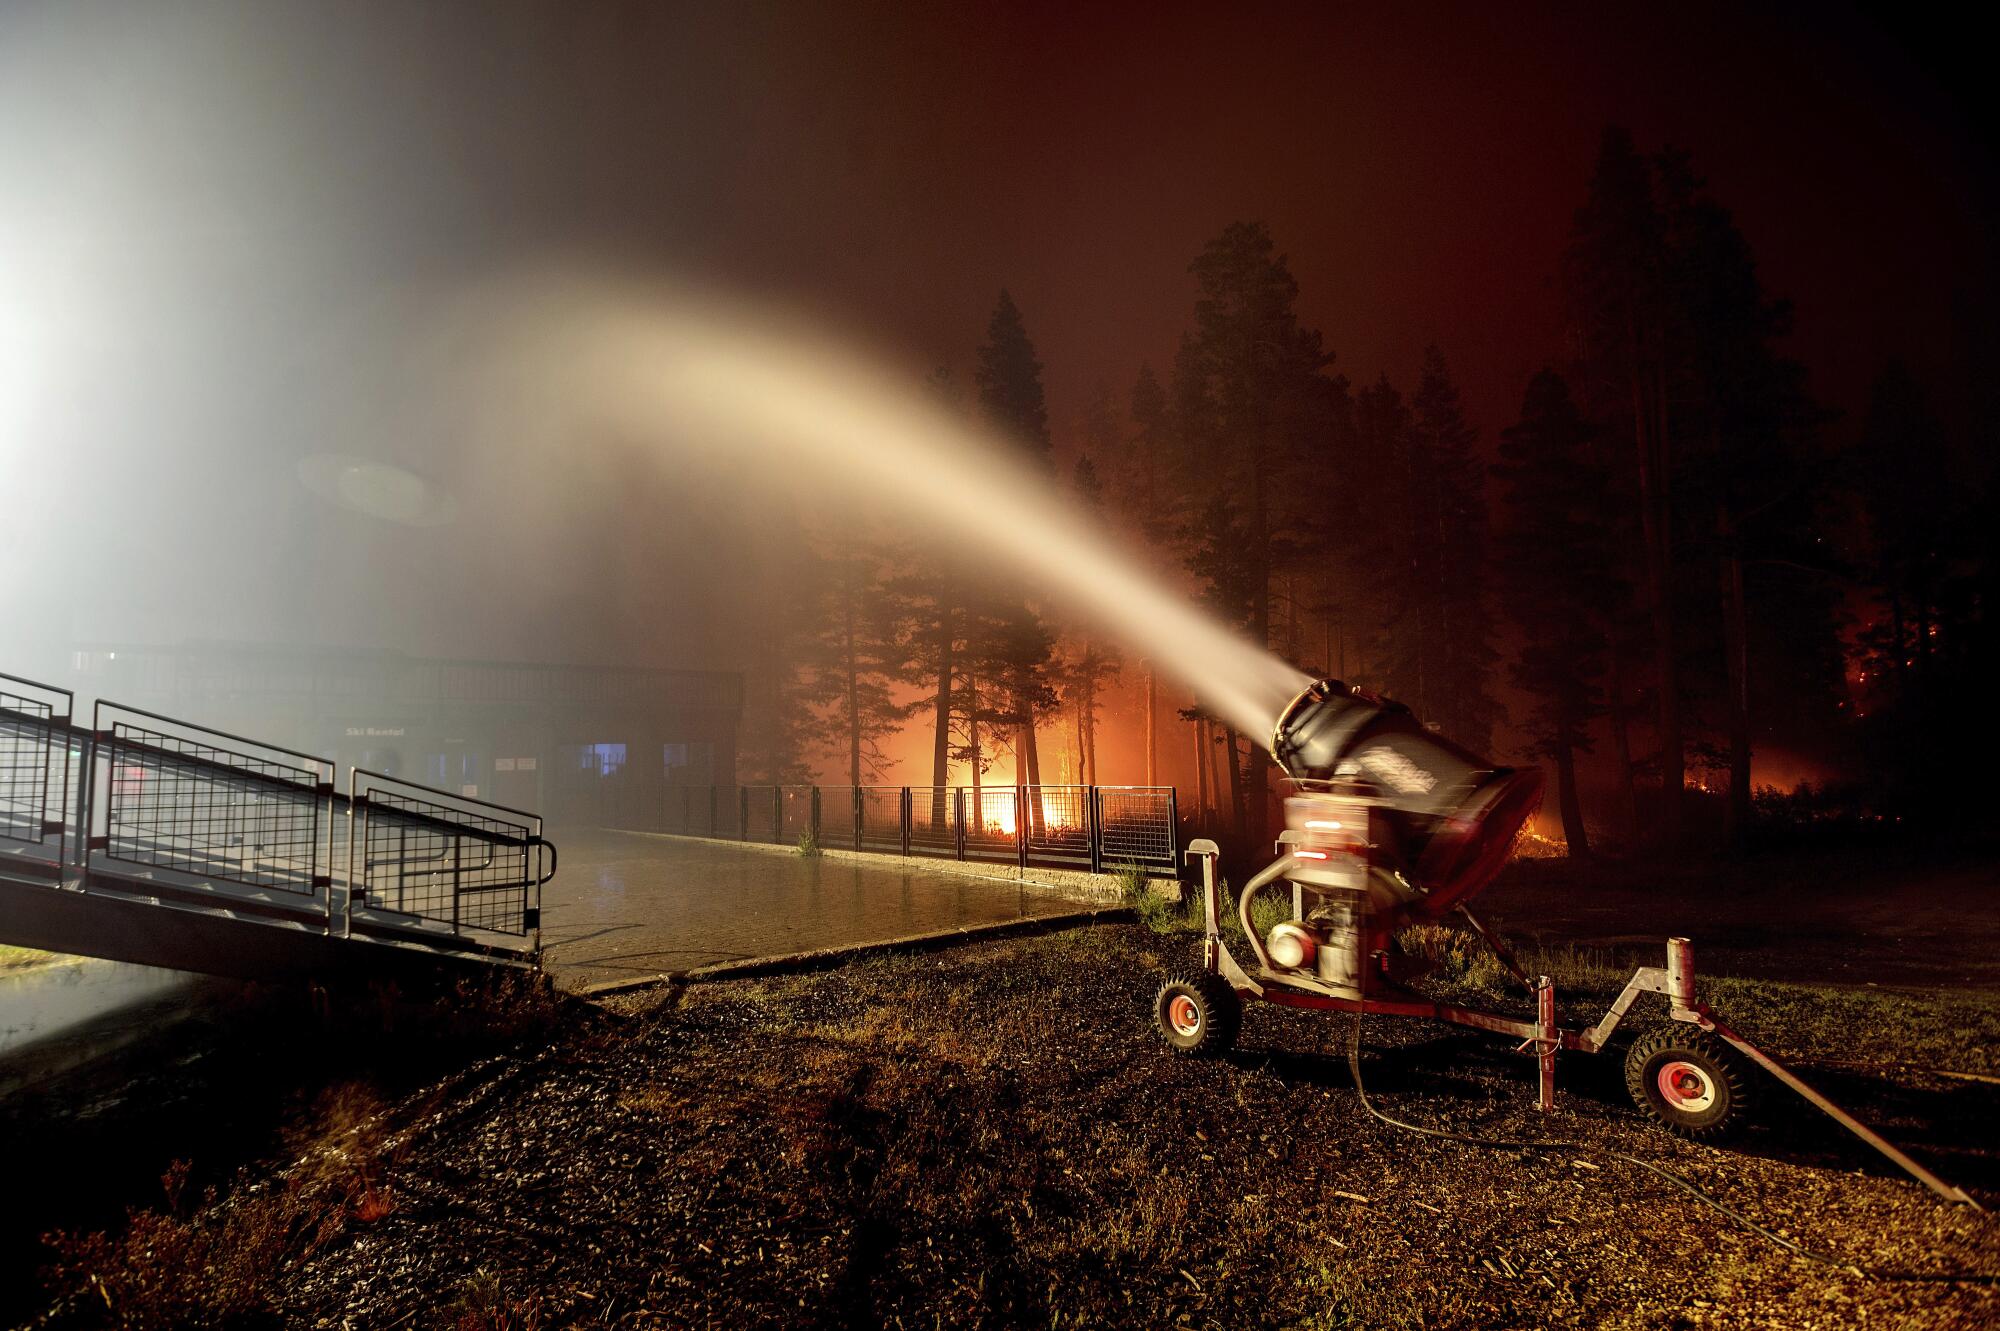 A fountain of water emerges from a snowmaking machine, with flames in the background.